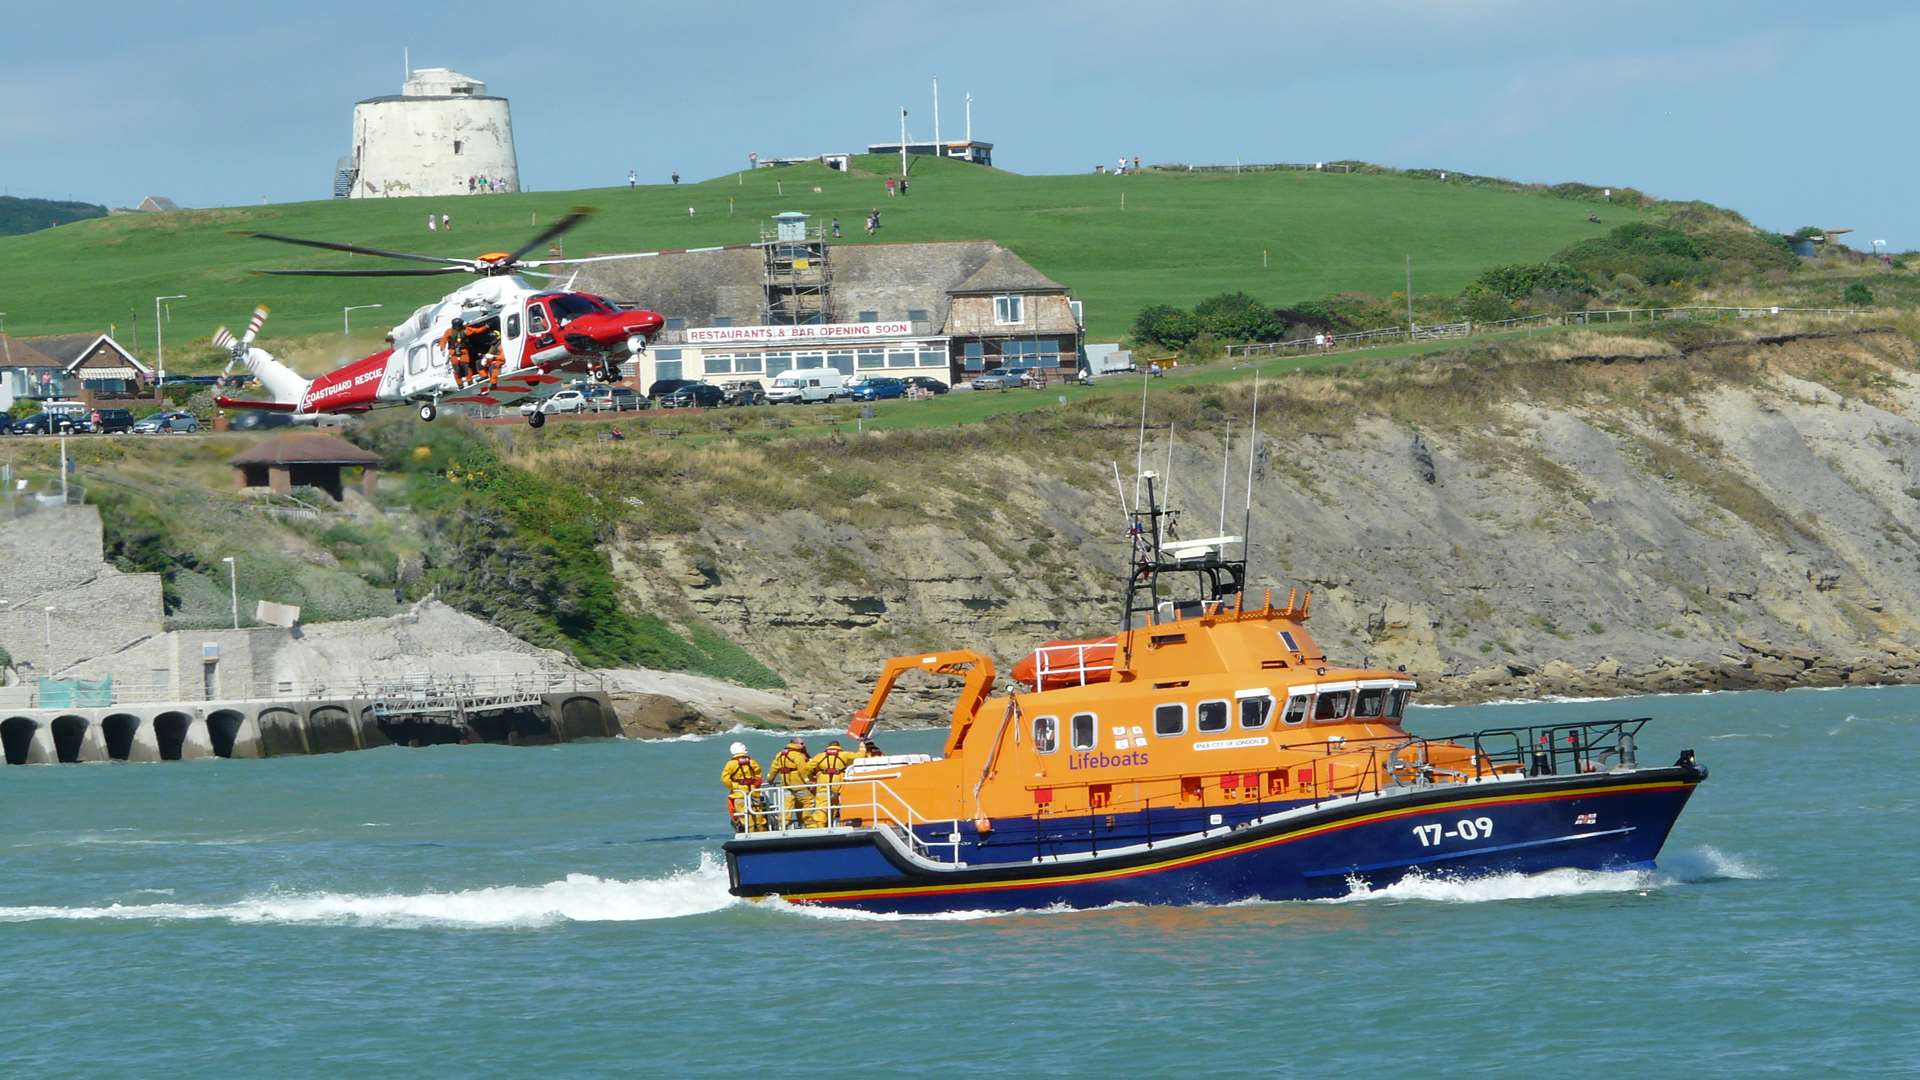 The Lifeboat crew helped in the operation.